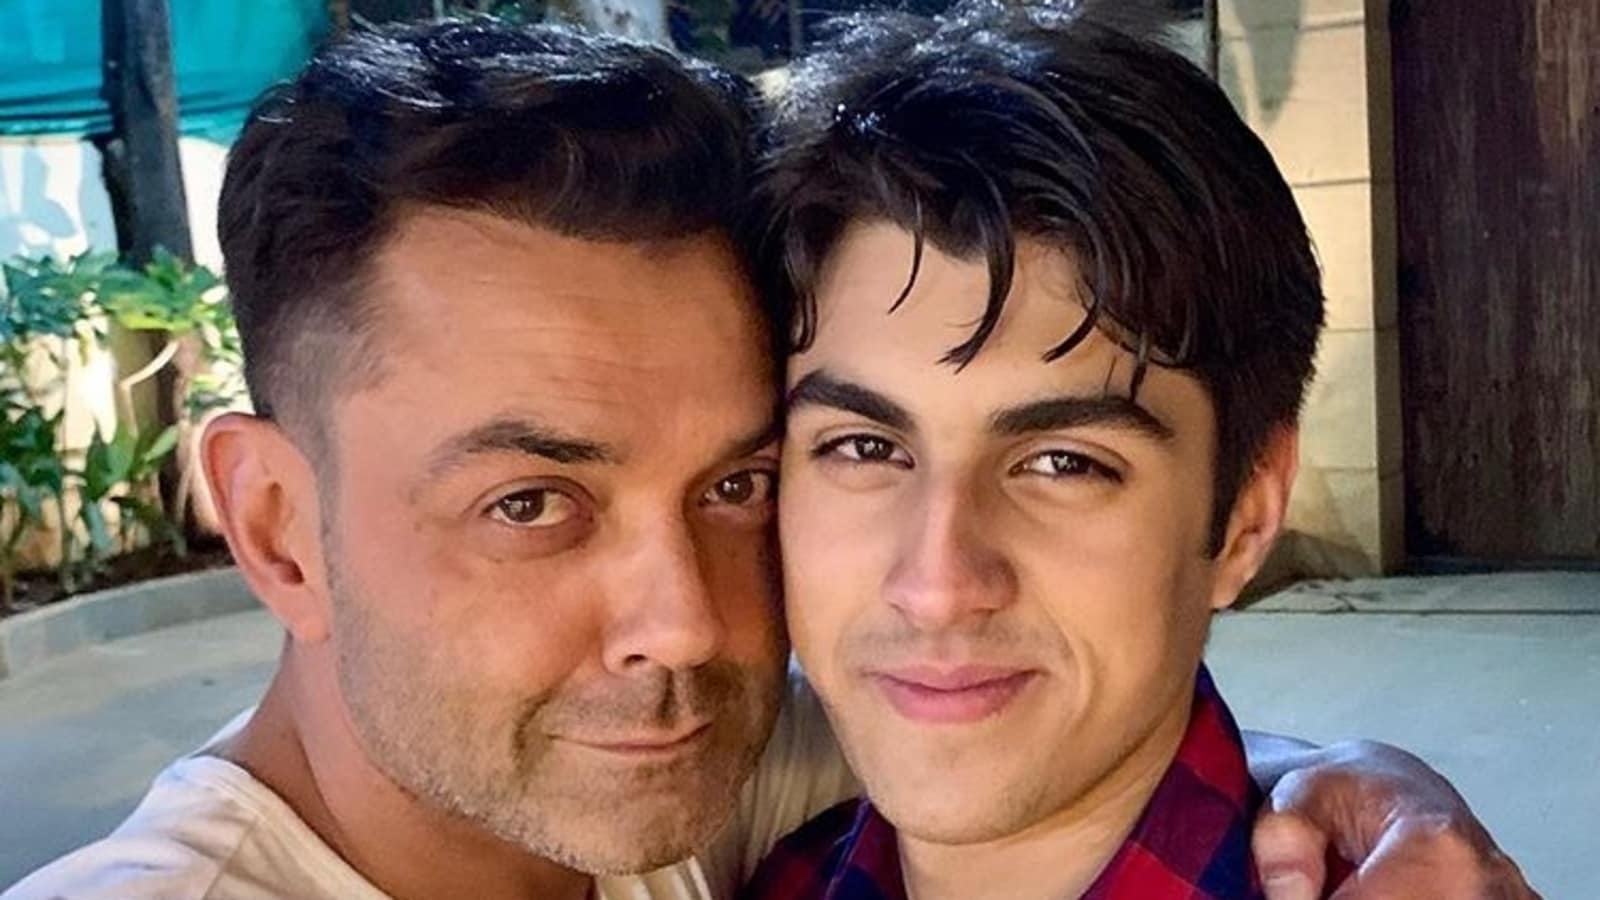 Bobby Deol says son’s good looks, cuteness cannot guarantee Bollywood success: ‘People said these things to me too’